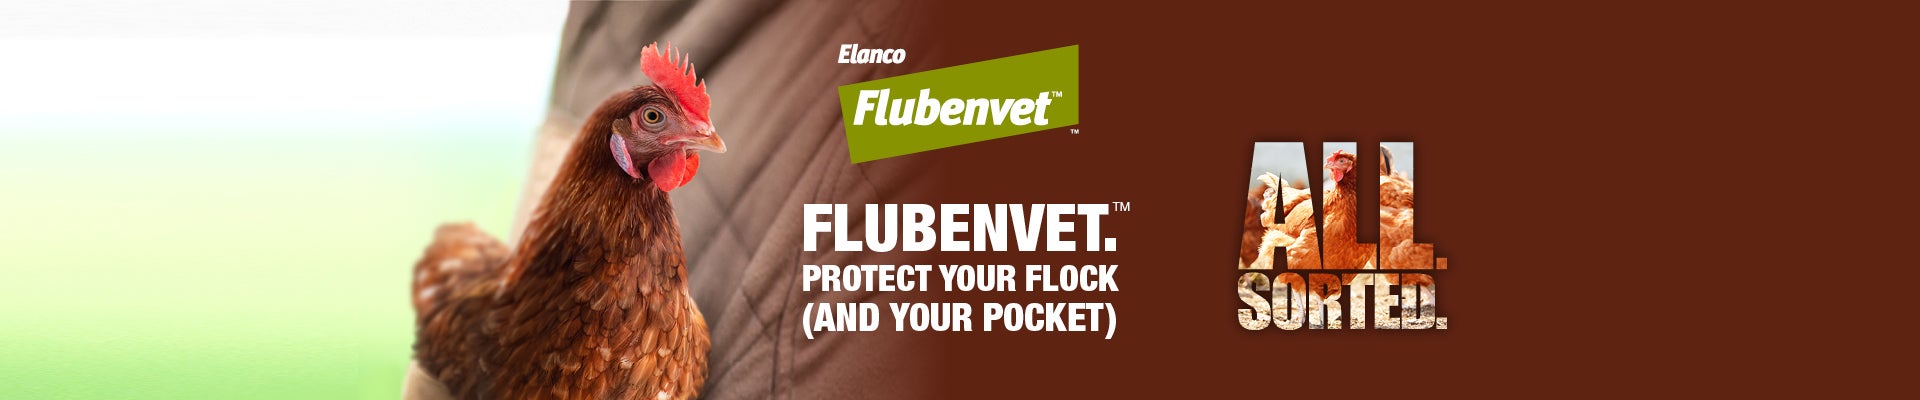 Flubenvet - protect your flock and your pocket